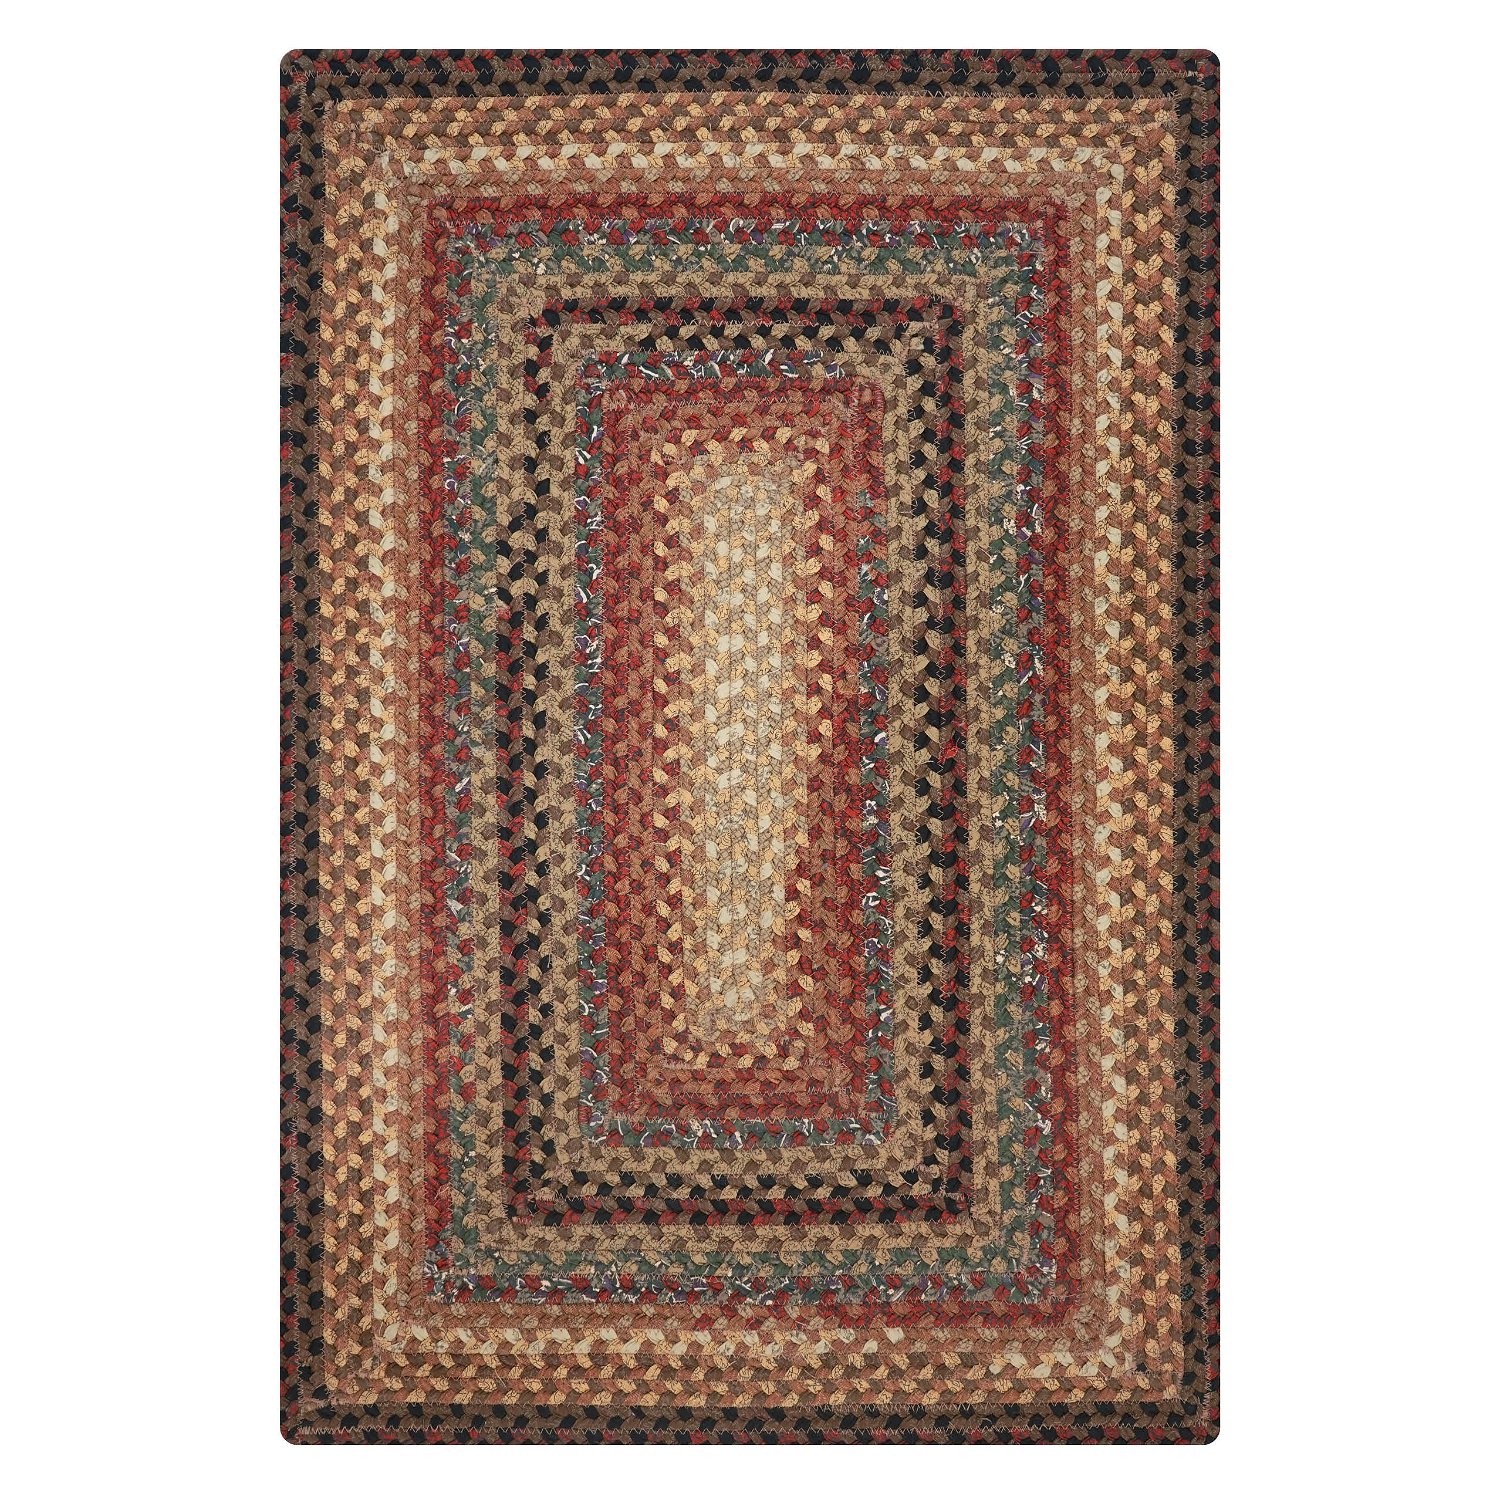 Homespice Rugs-Cotton Braided Rug-Peppercorn-Brown